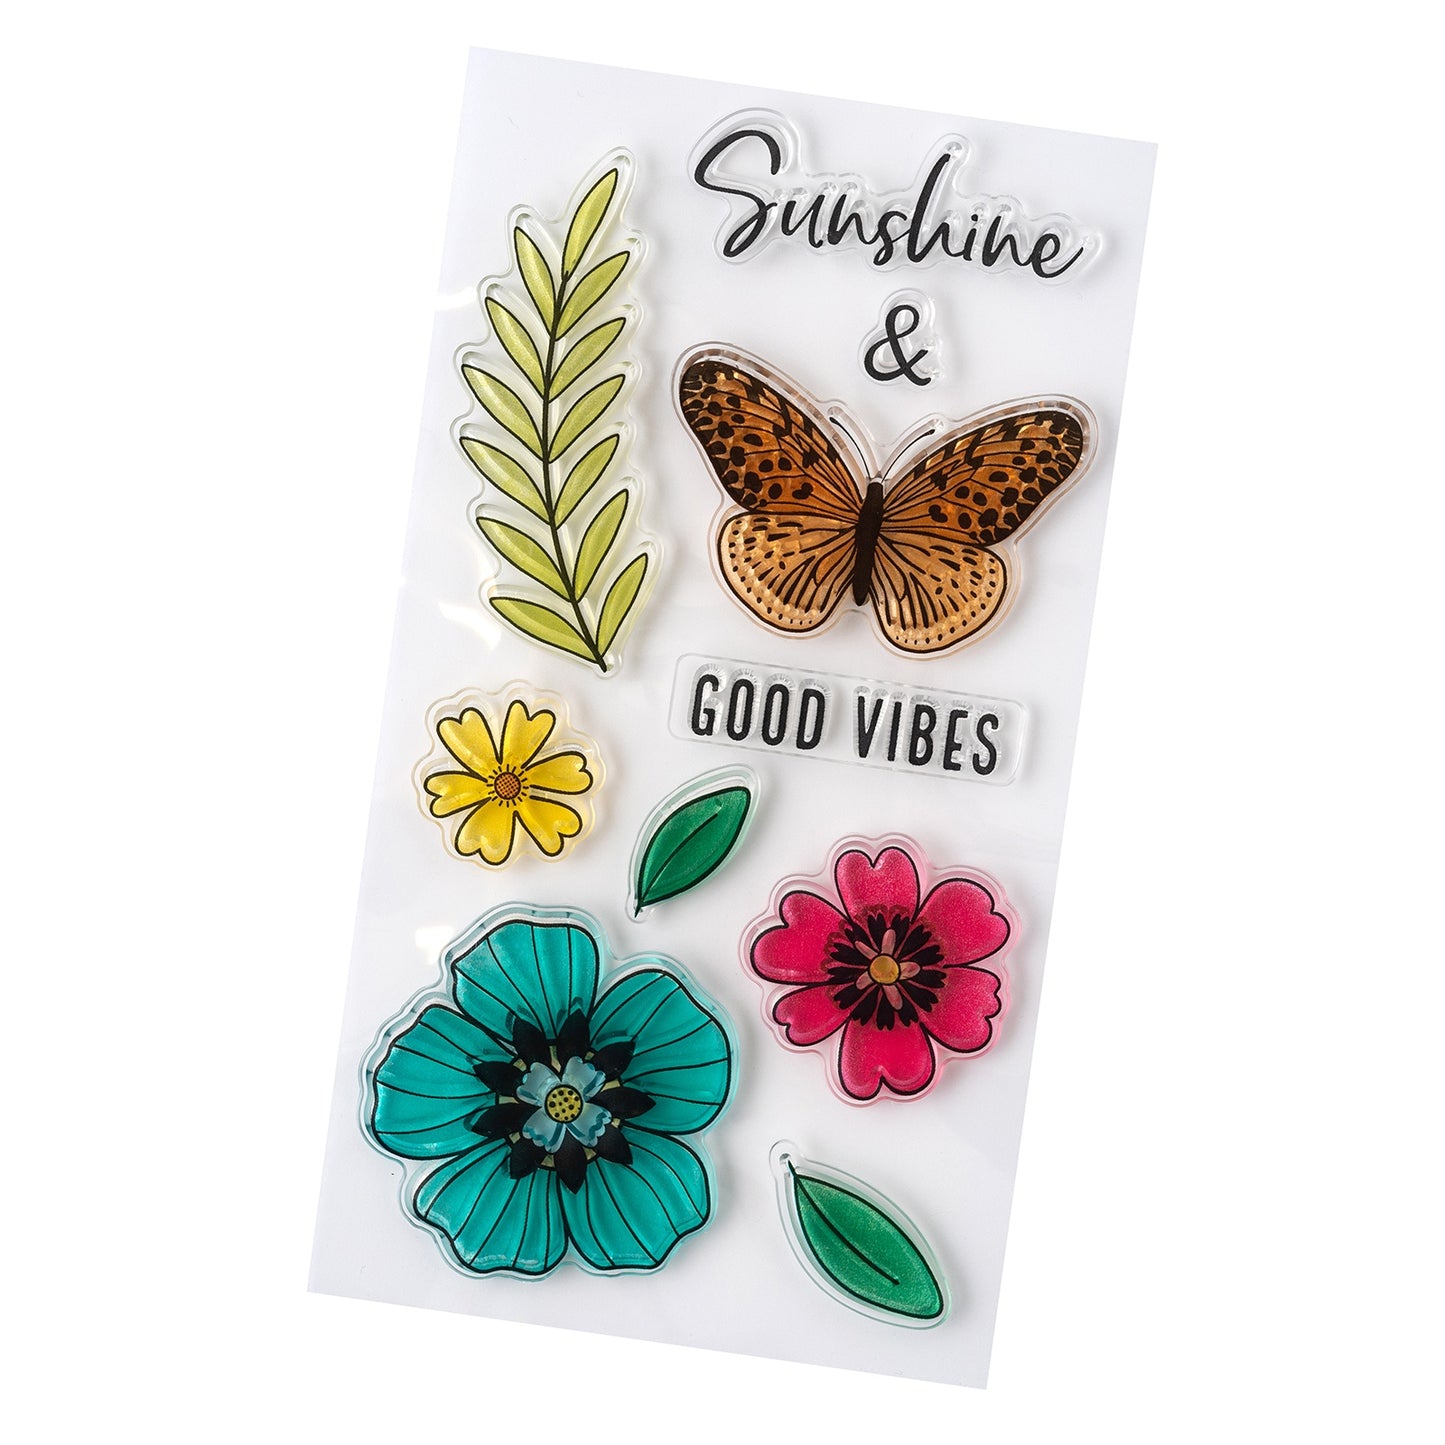 Vicki Boutin Where To Next Clear Stamps 12/Pkg-Good Vibes